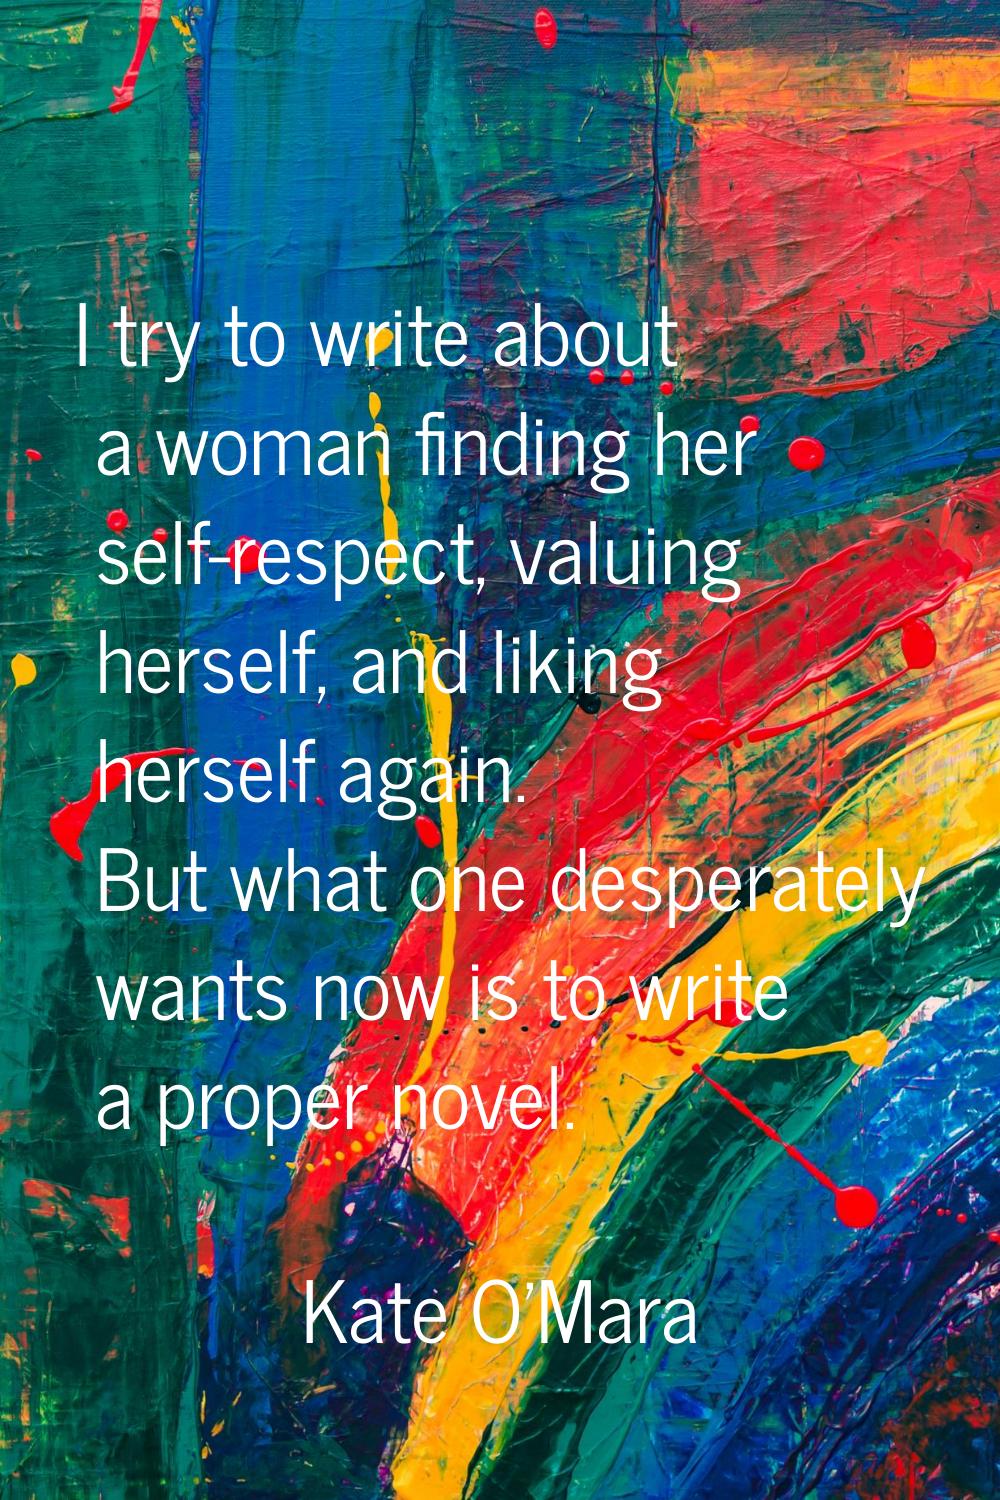 I try to write about a woman finding her self-respect, valuing herself, and liking herself again. B